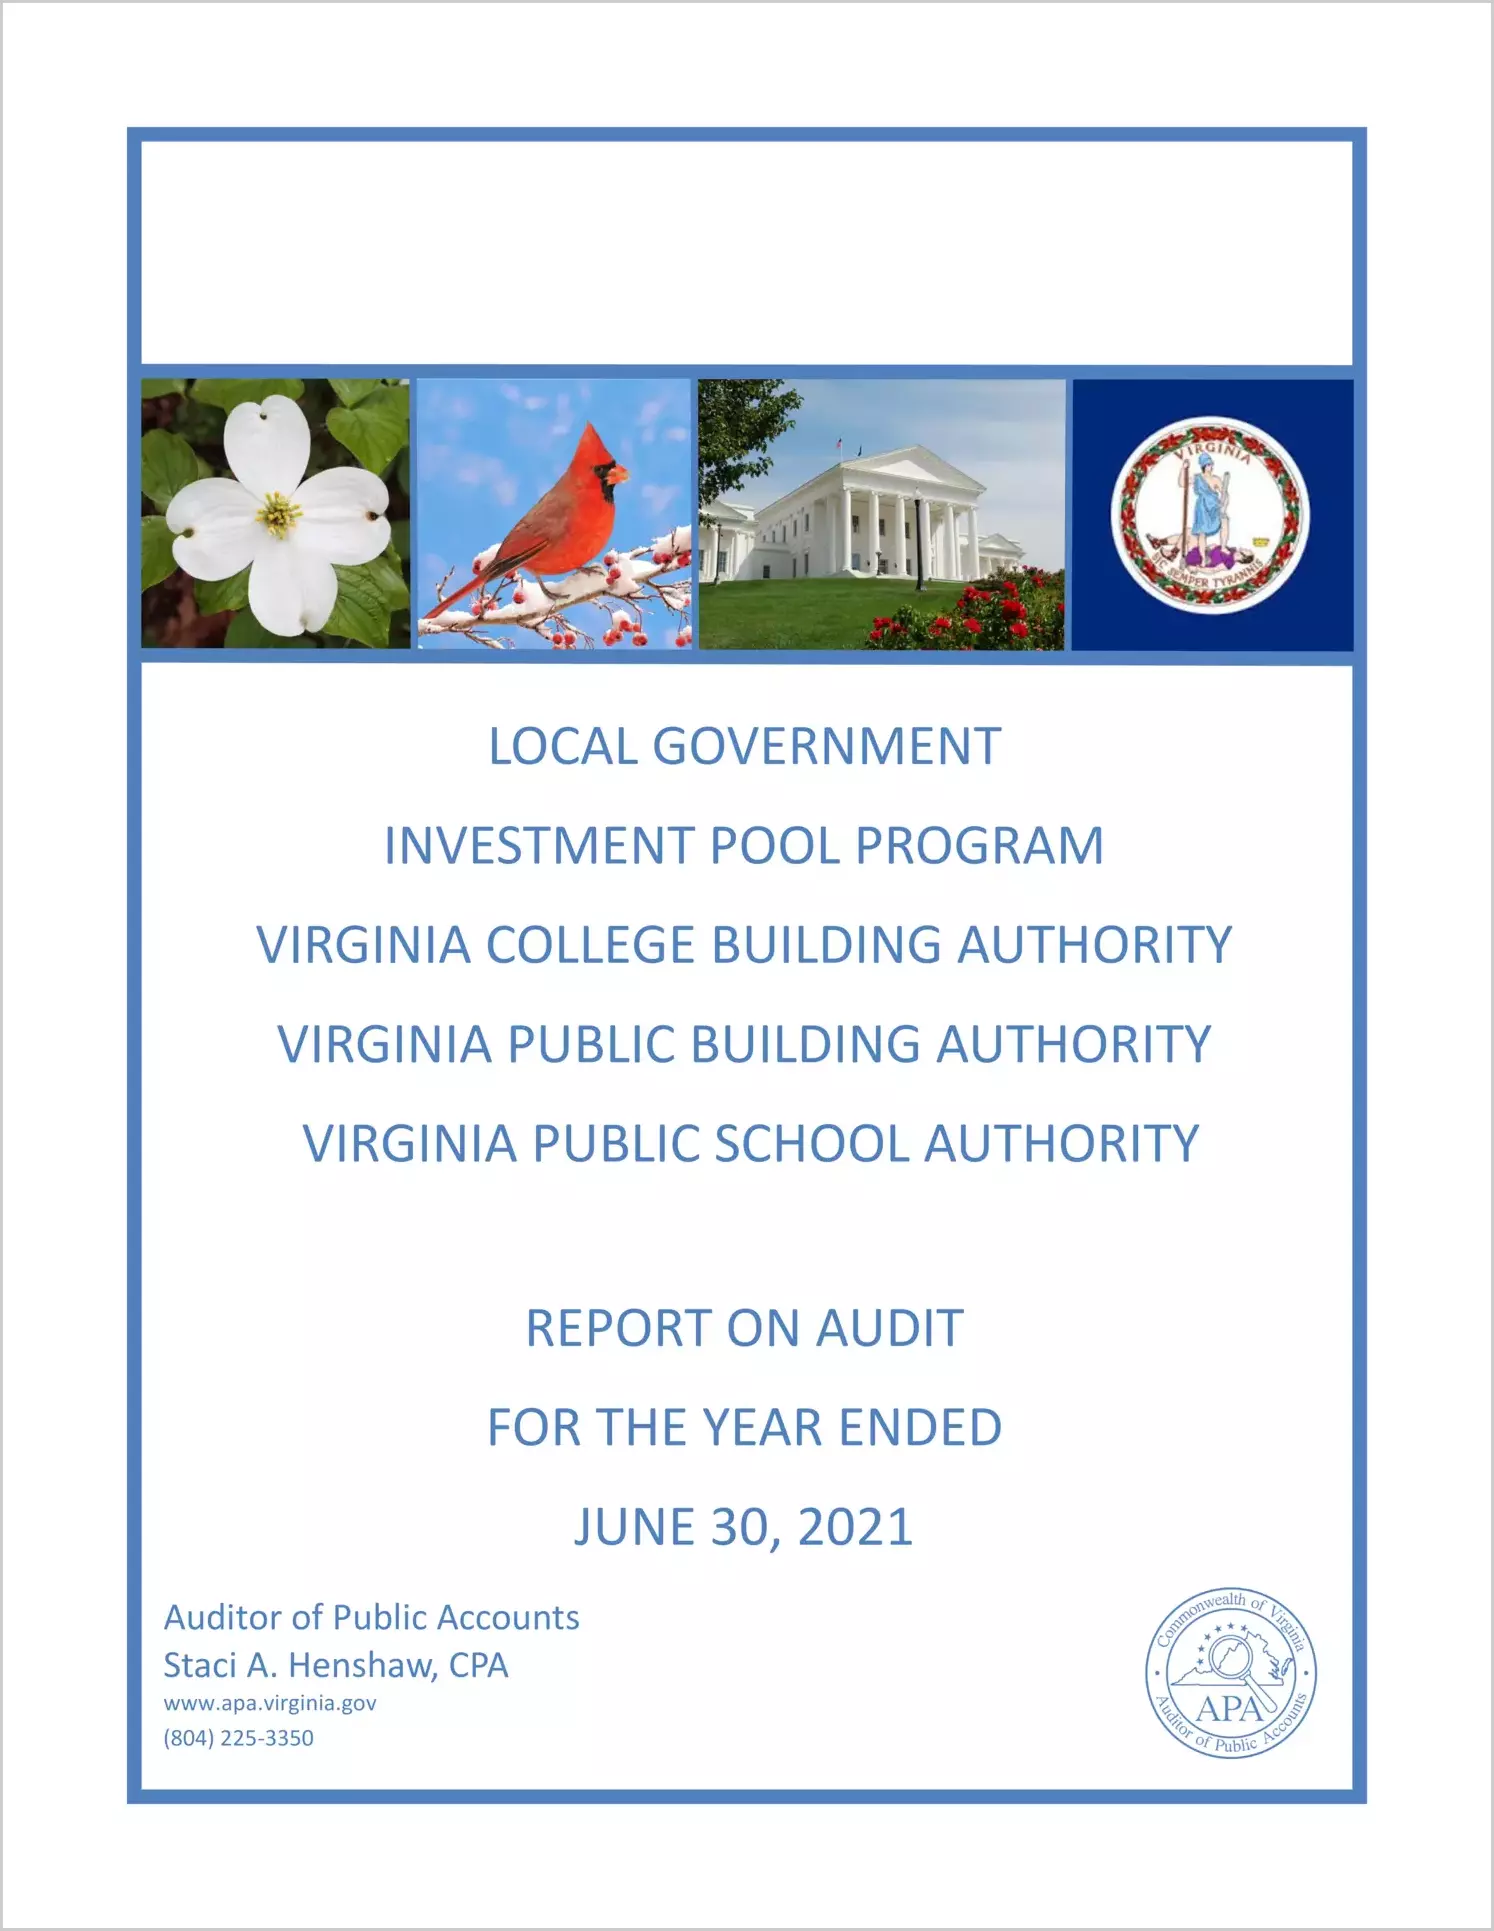 Local Government Investment Pool Program, Virginia College Building Authority, Virginia Public Building Authority, Virginia Public School Authority for the year ended June 30, 2021